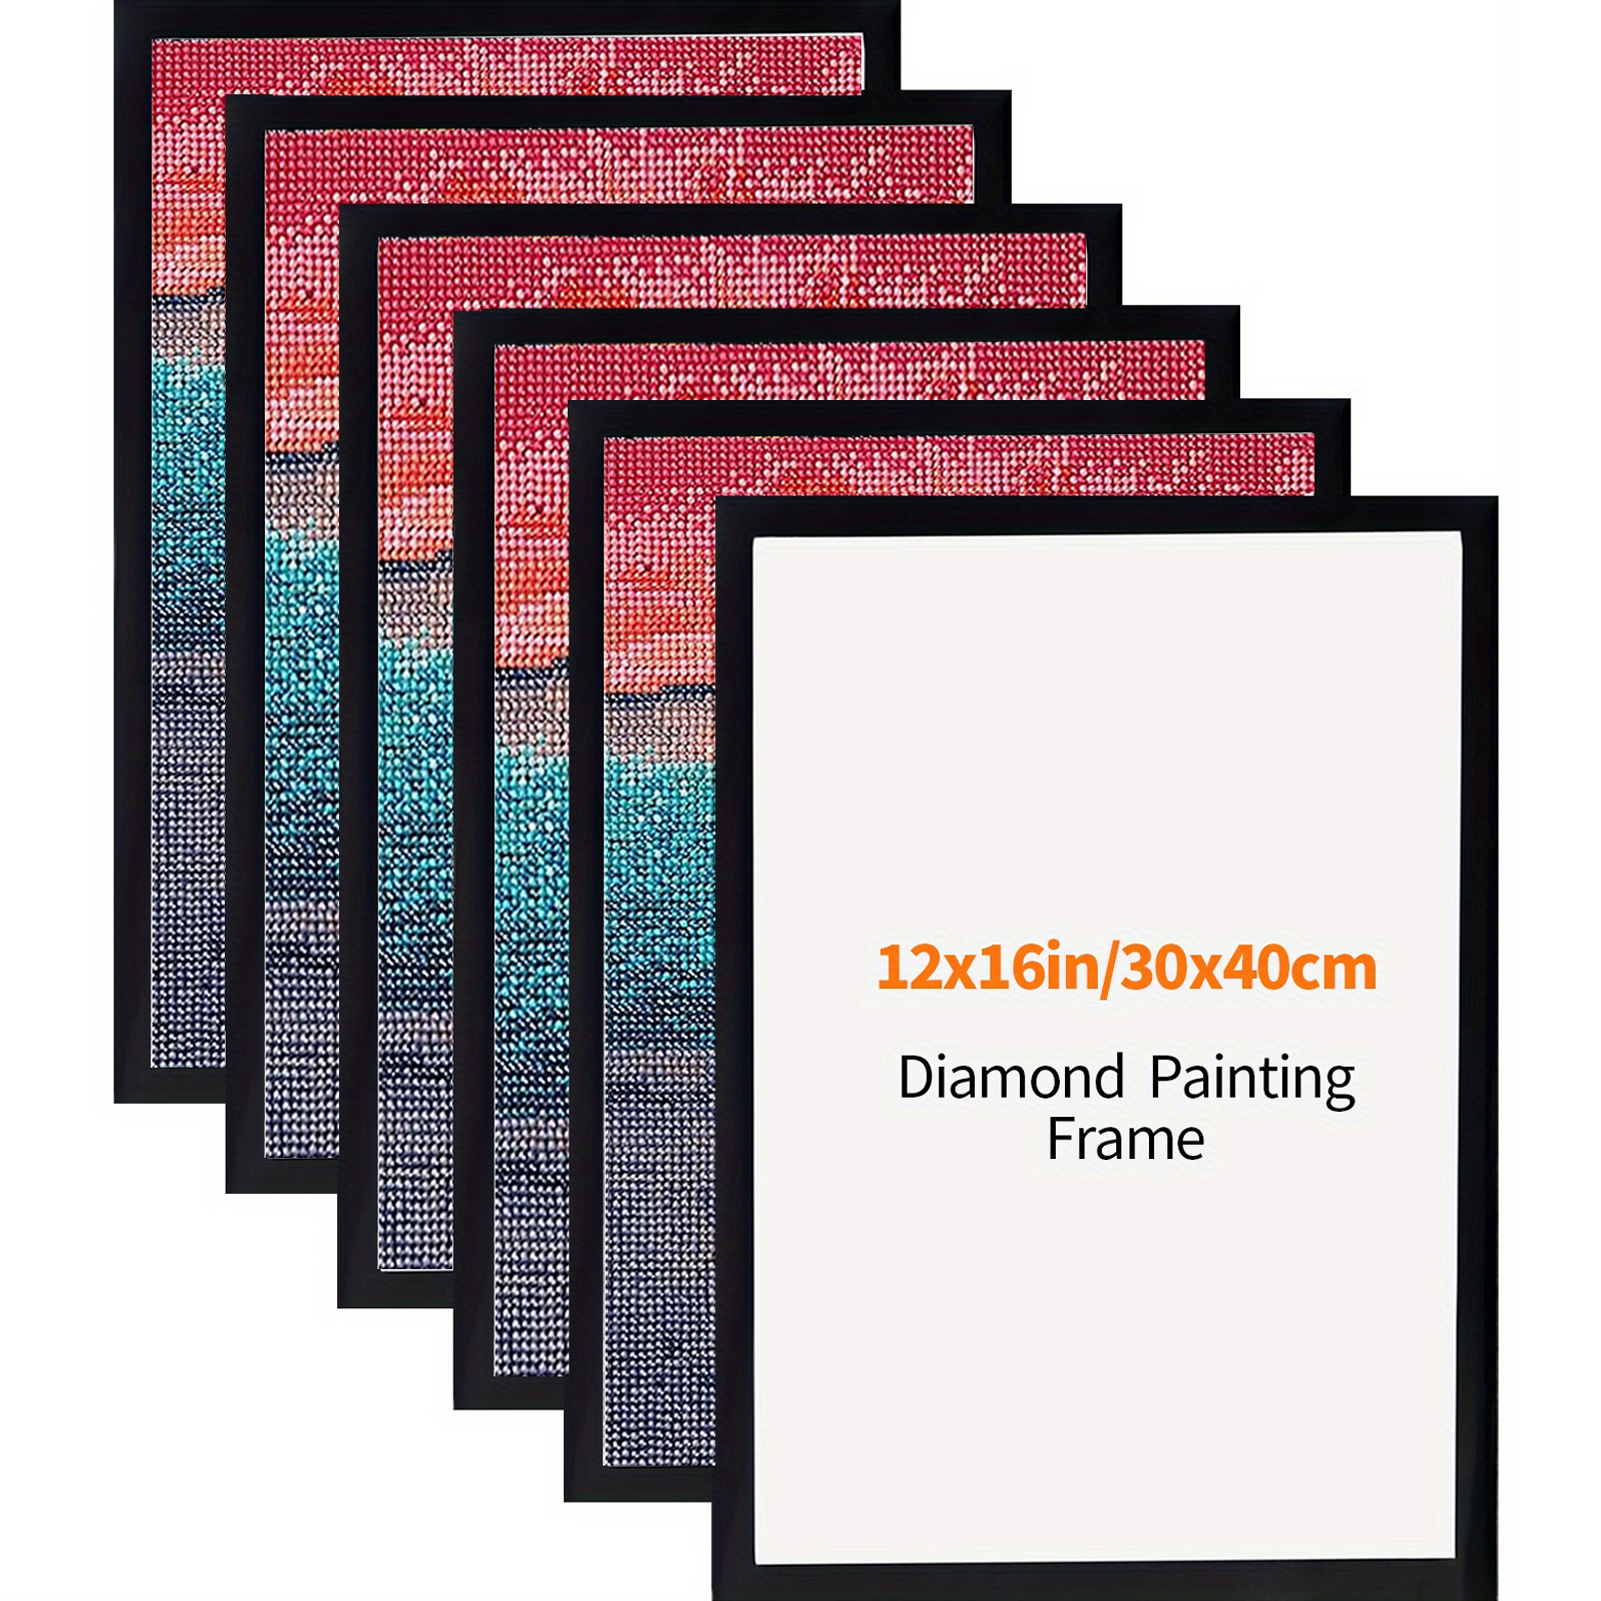  4 Pack Diamond Painting Frames Magnetic Diamond Art Frames  11 X 11 Inch/ 28 X 28 Cm Self Adhesive Frames For Diamond Painting Pictures  12 X 12 Inch/ 30 X 30 Cm Canvas Decorations Accessories